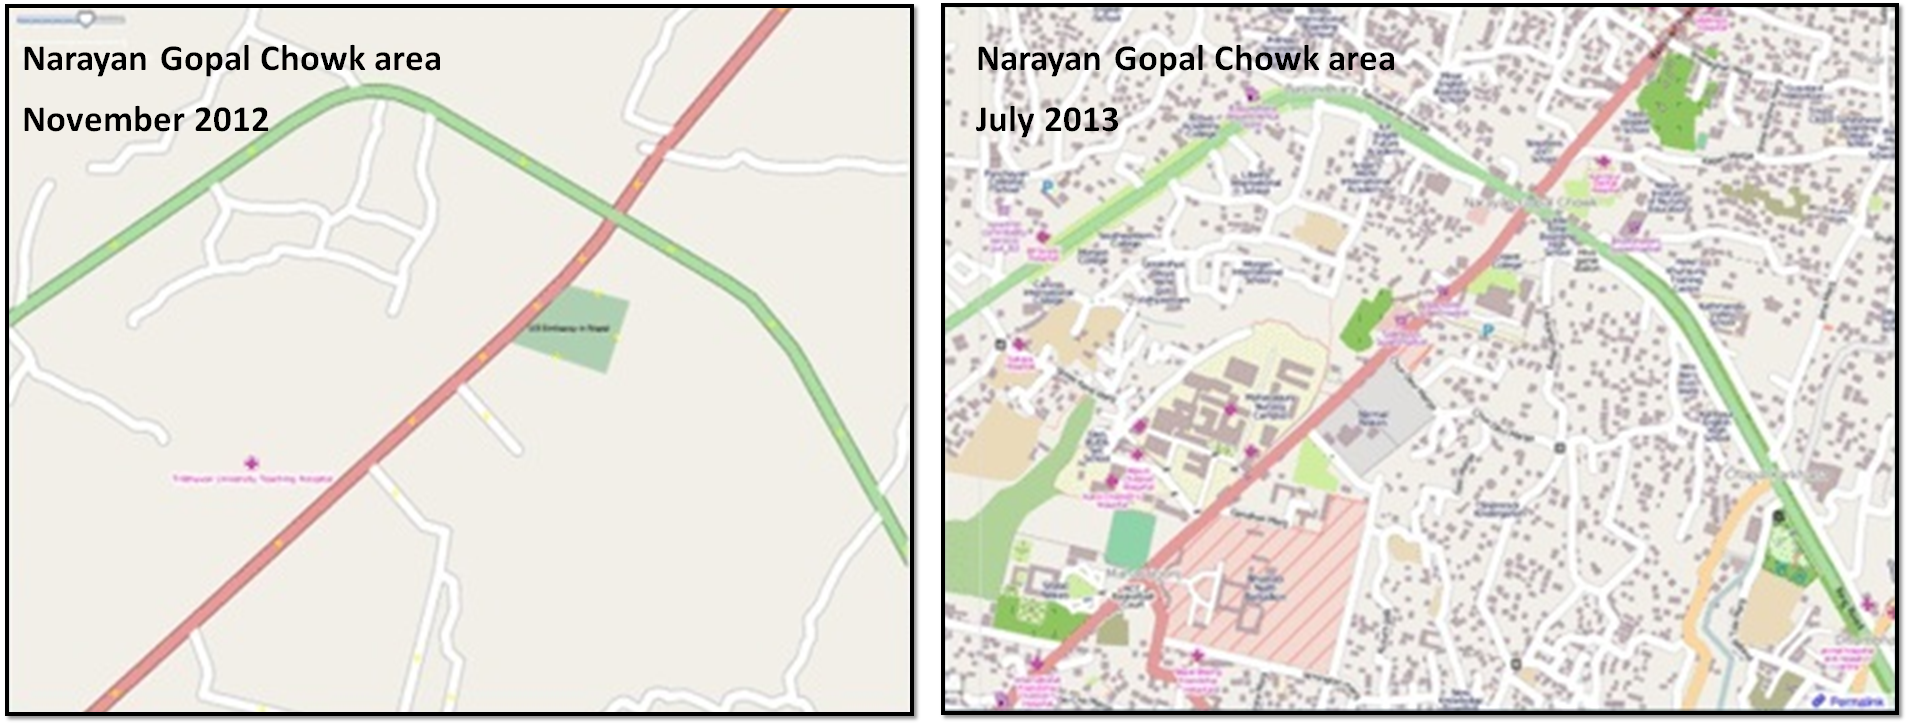 Improved representation of Kathmandu on OpenStreetMap after KLL efforts. Zooming-in view of a typical intersection in Narayan Gopal Chowk area of Kathmandu. Source: KLL, 2018.